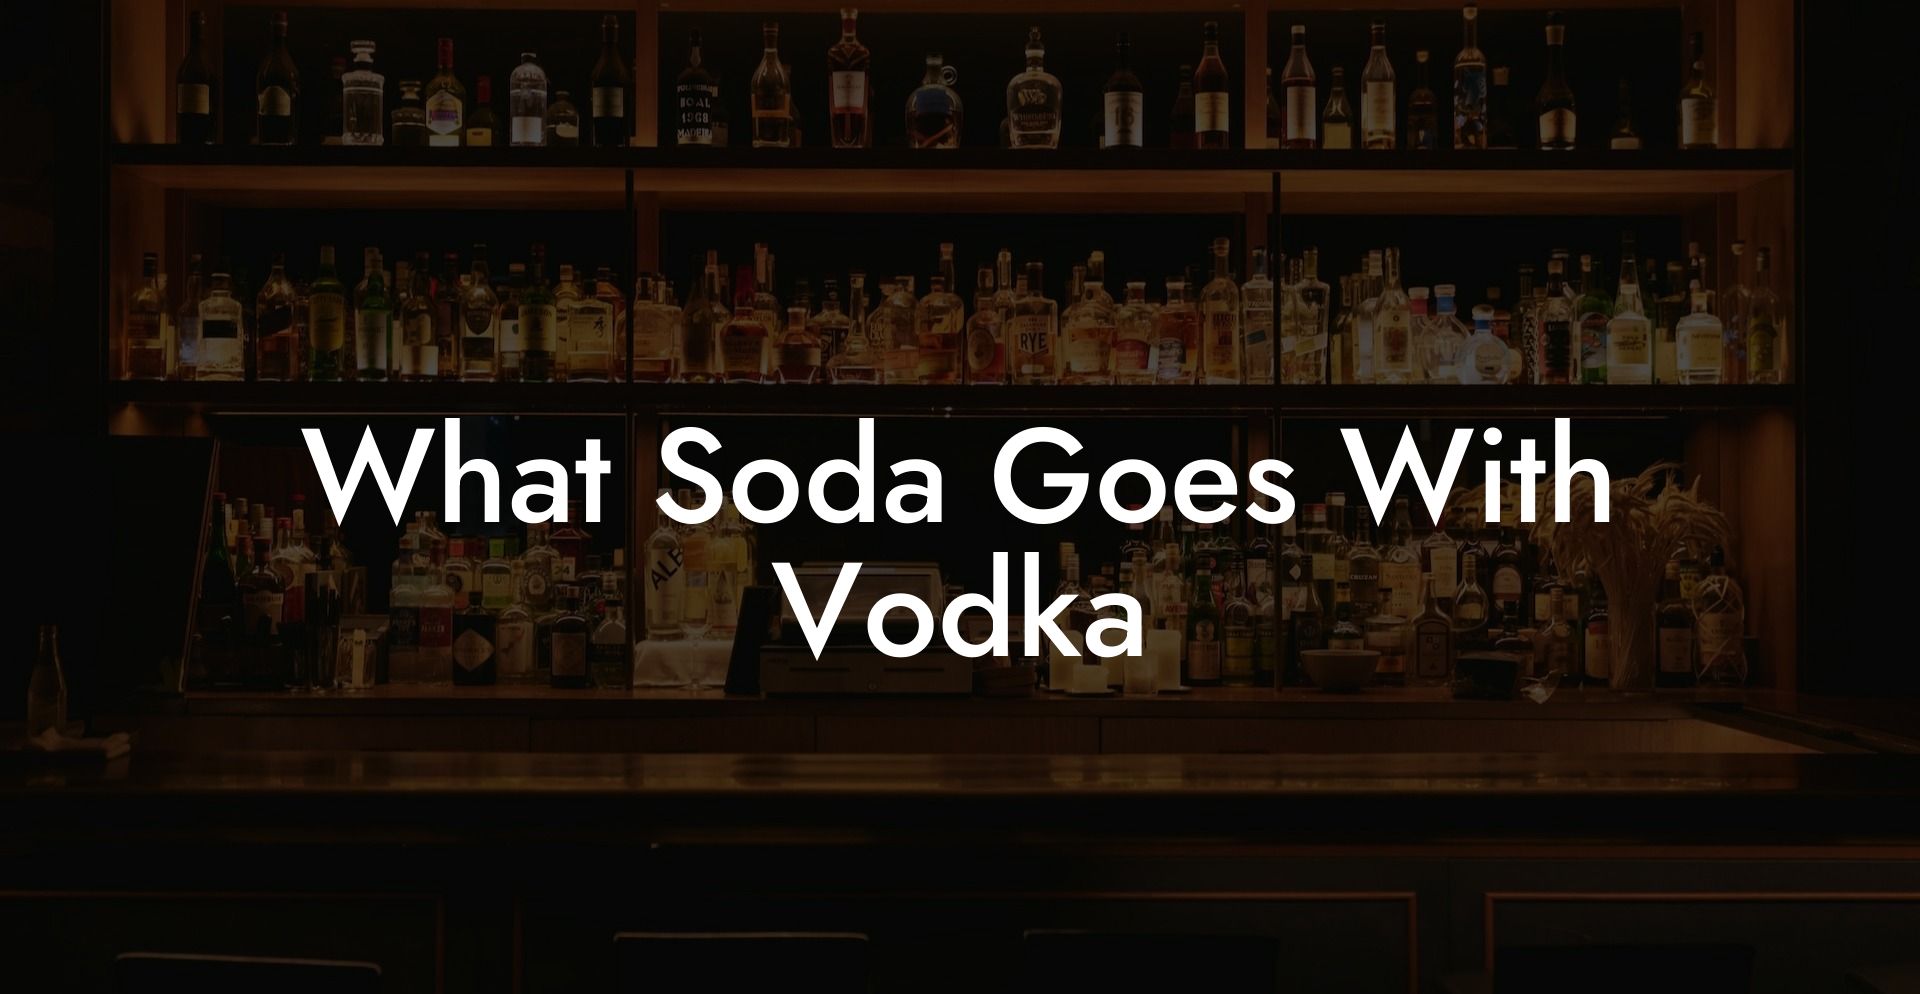 What Soda Goes With Vodka